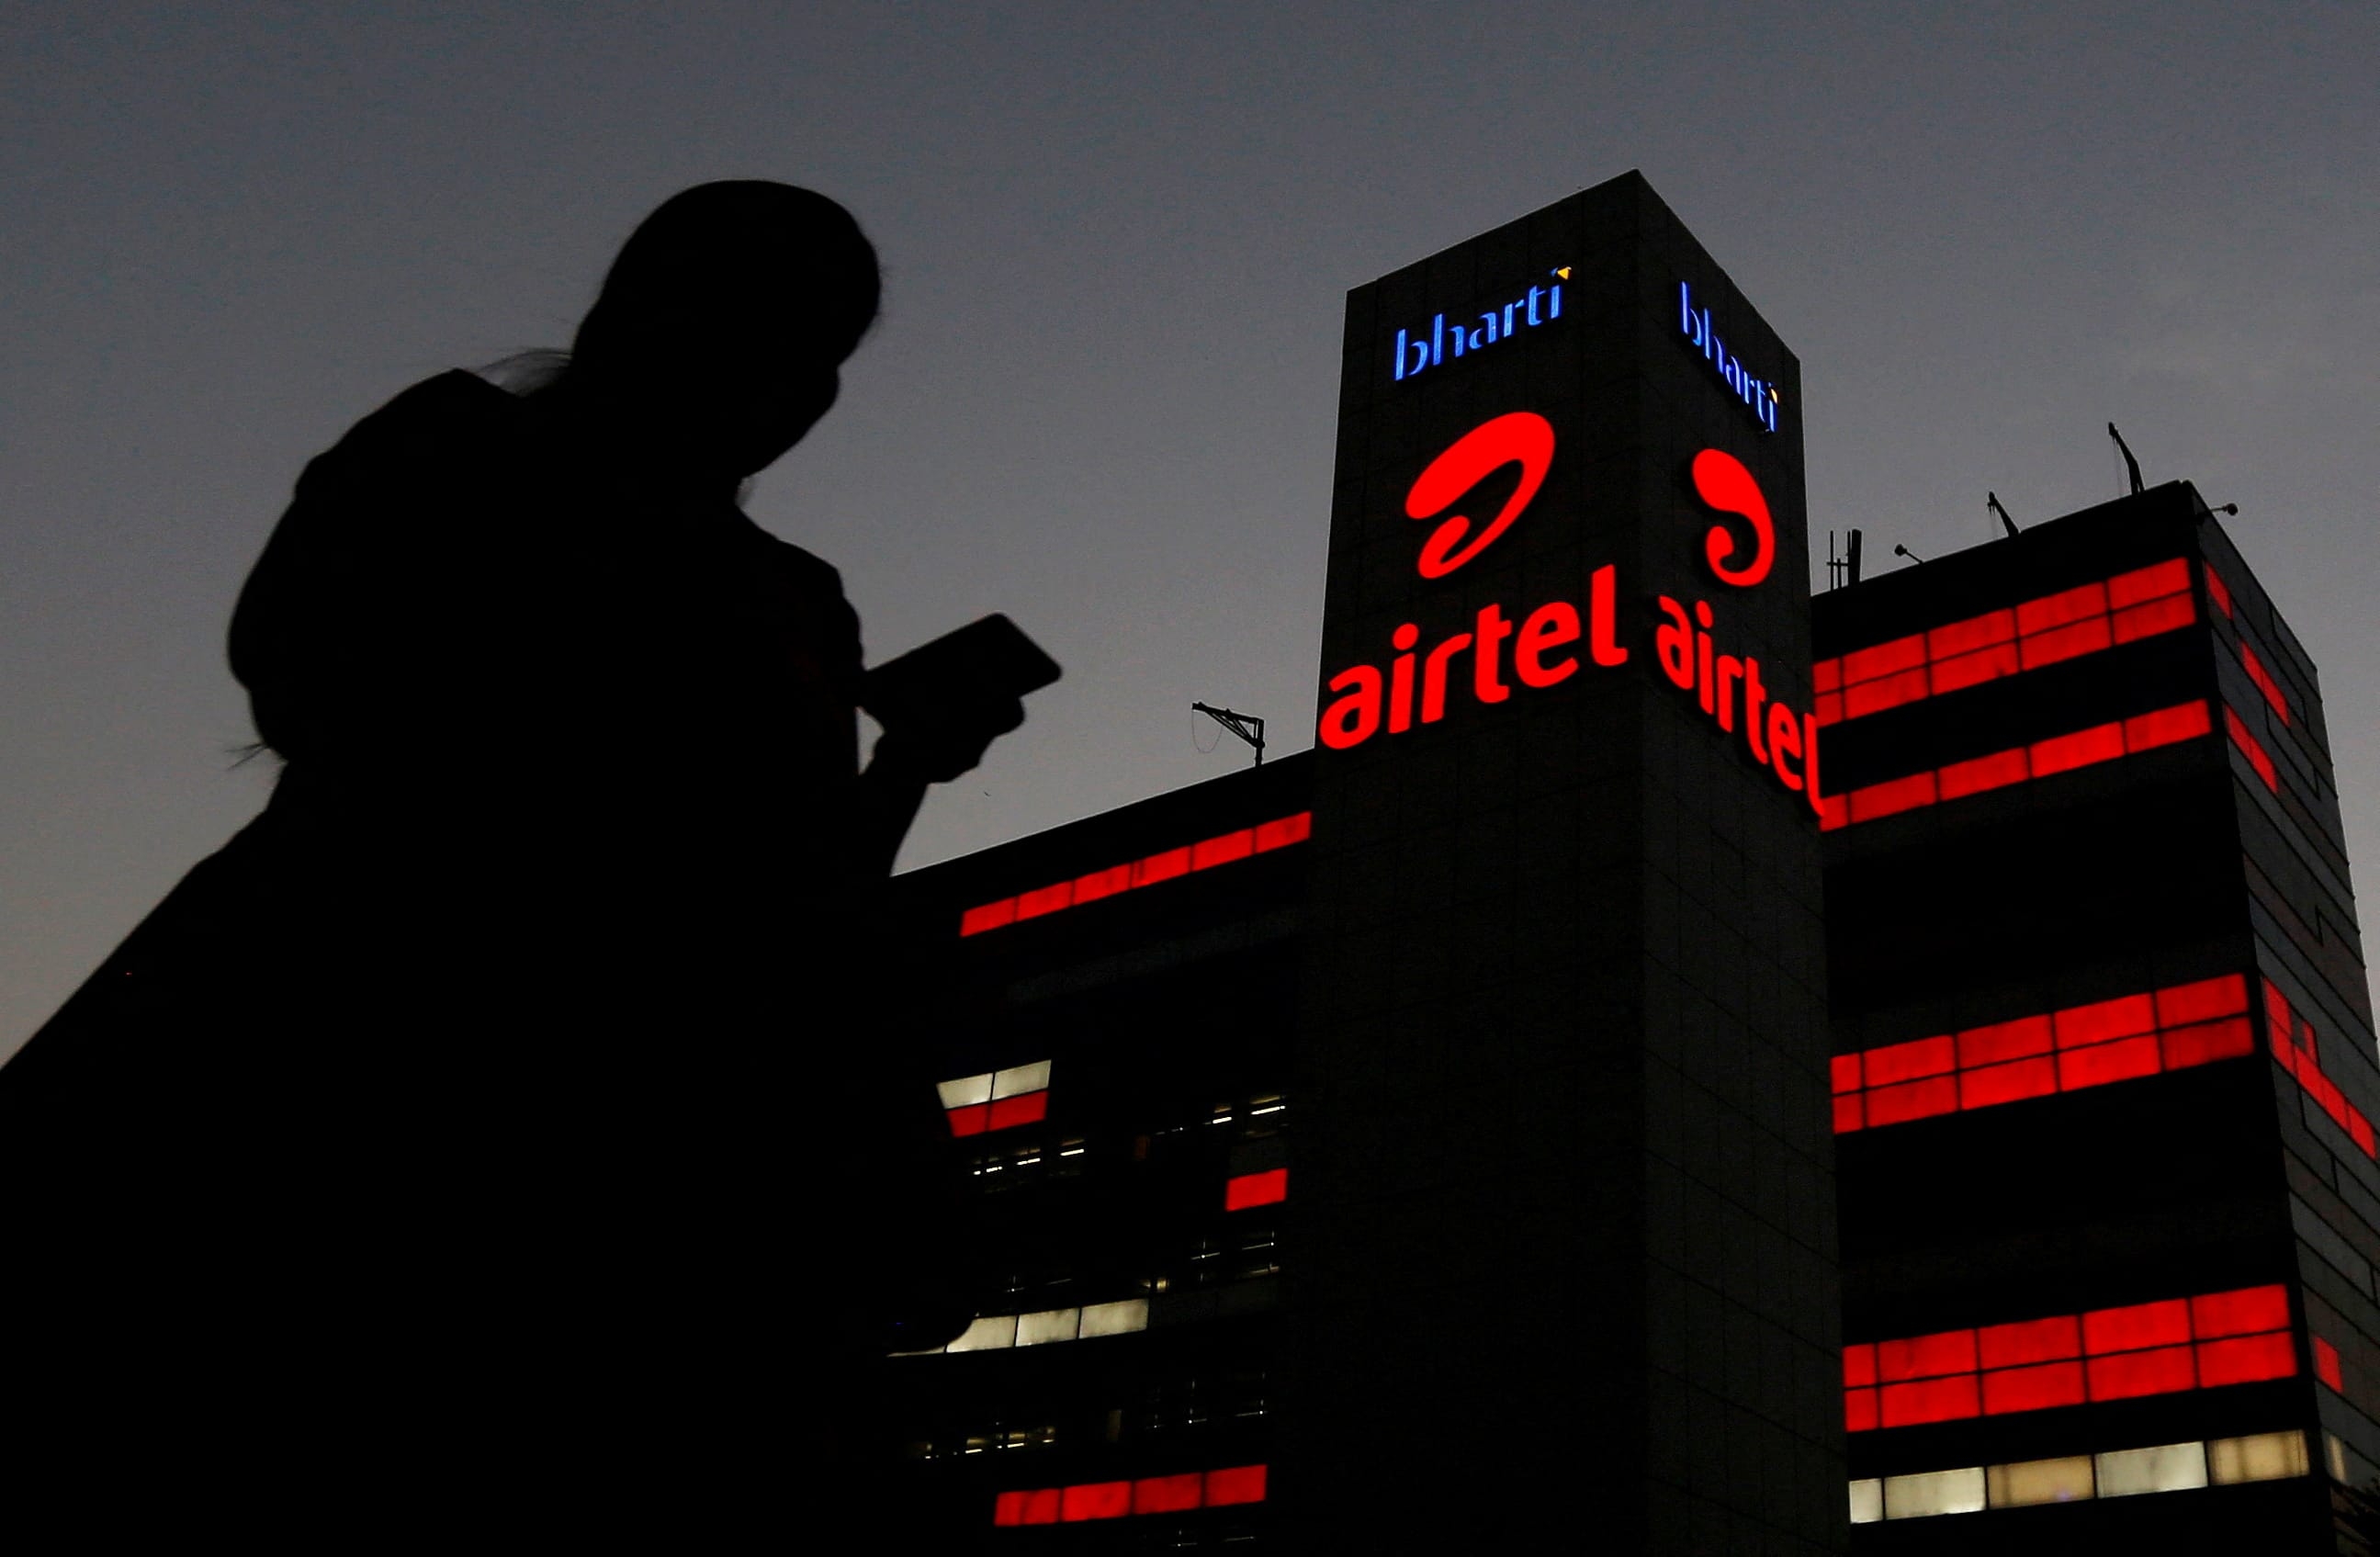 Airtel plans to reach its target of Rs. 300 ARPU in 5 years. It expects the next tariff hike, which is pending this year, to drive the company's APRU to  <span class='webrupee'>₹</span>200 mark.